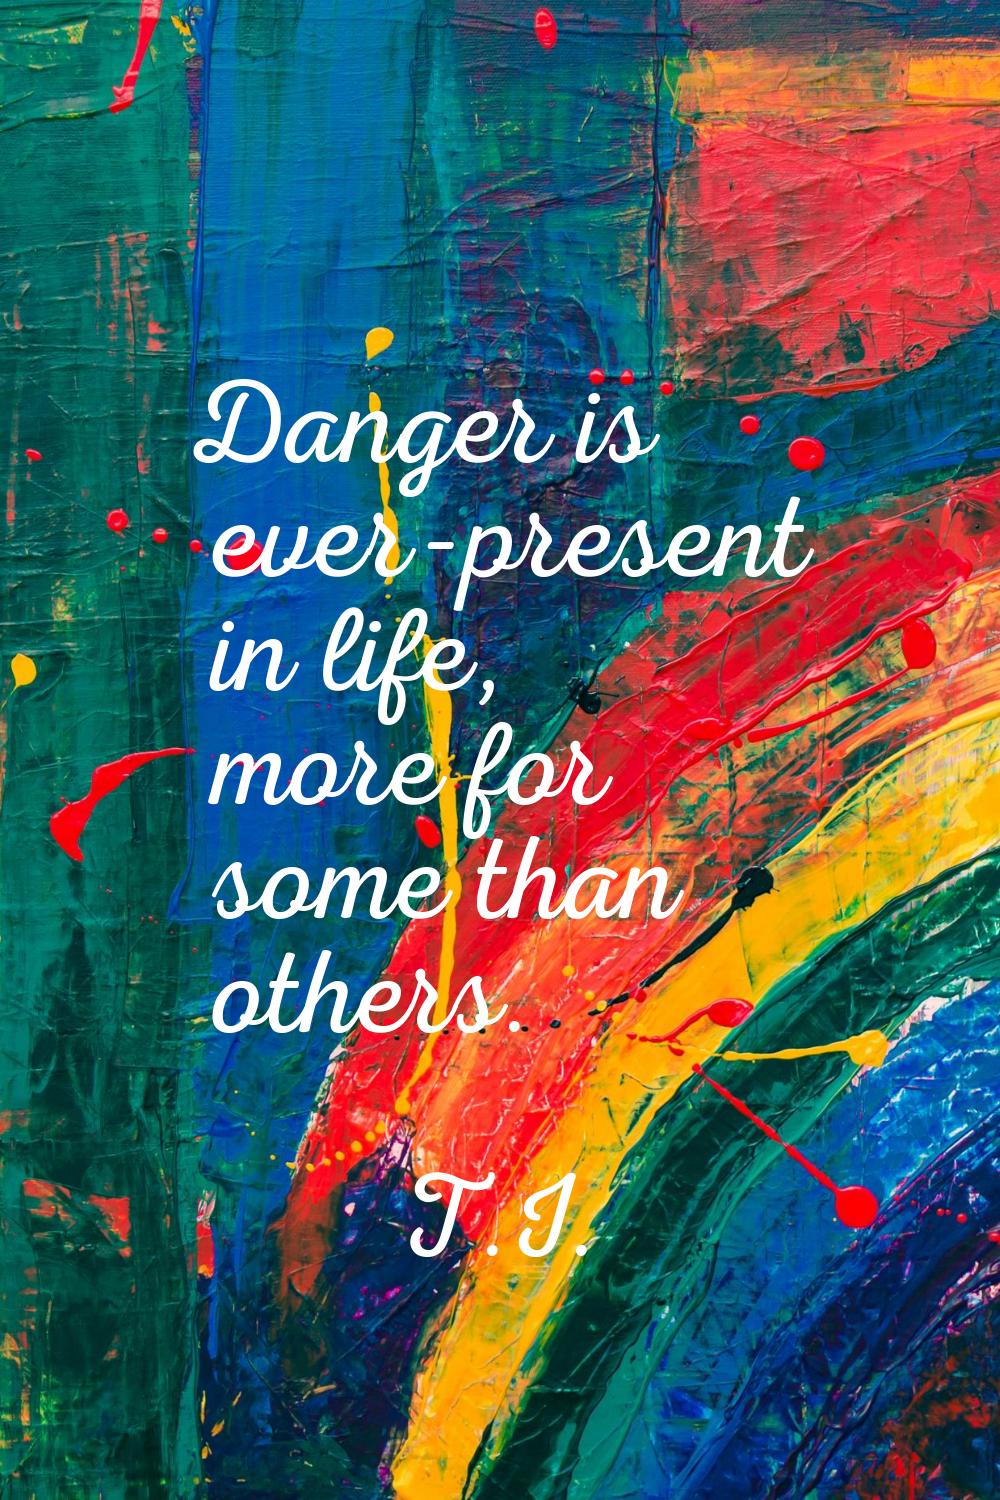 Danger is ever-present in life, more for some than others.